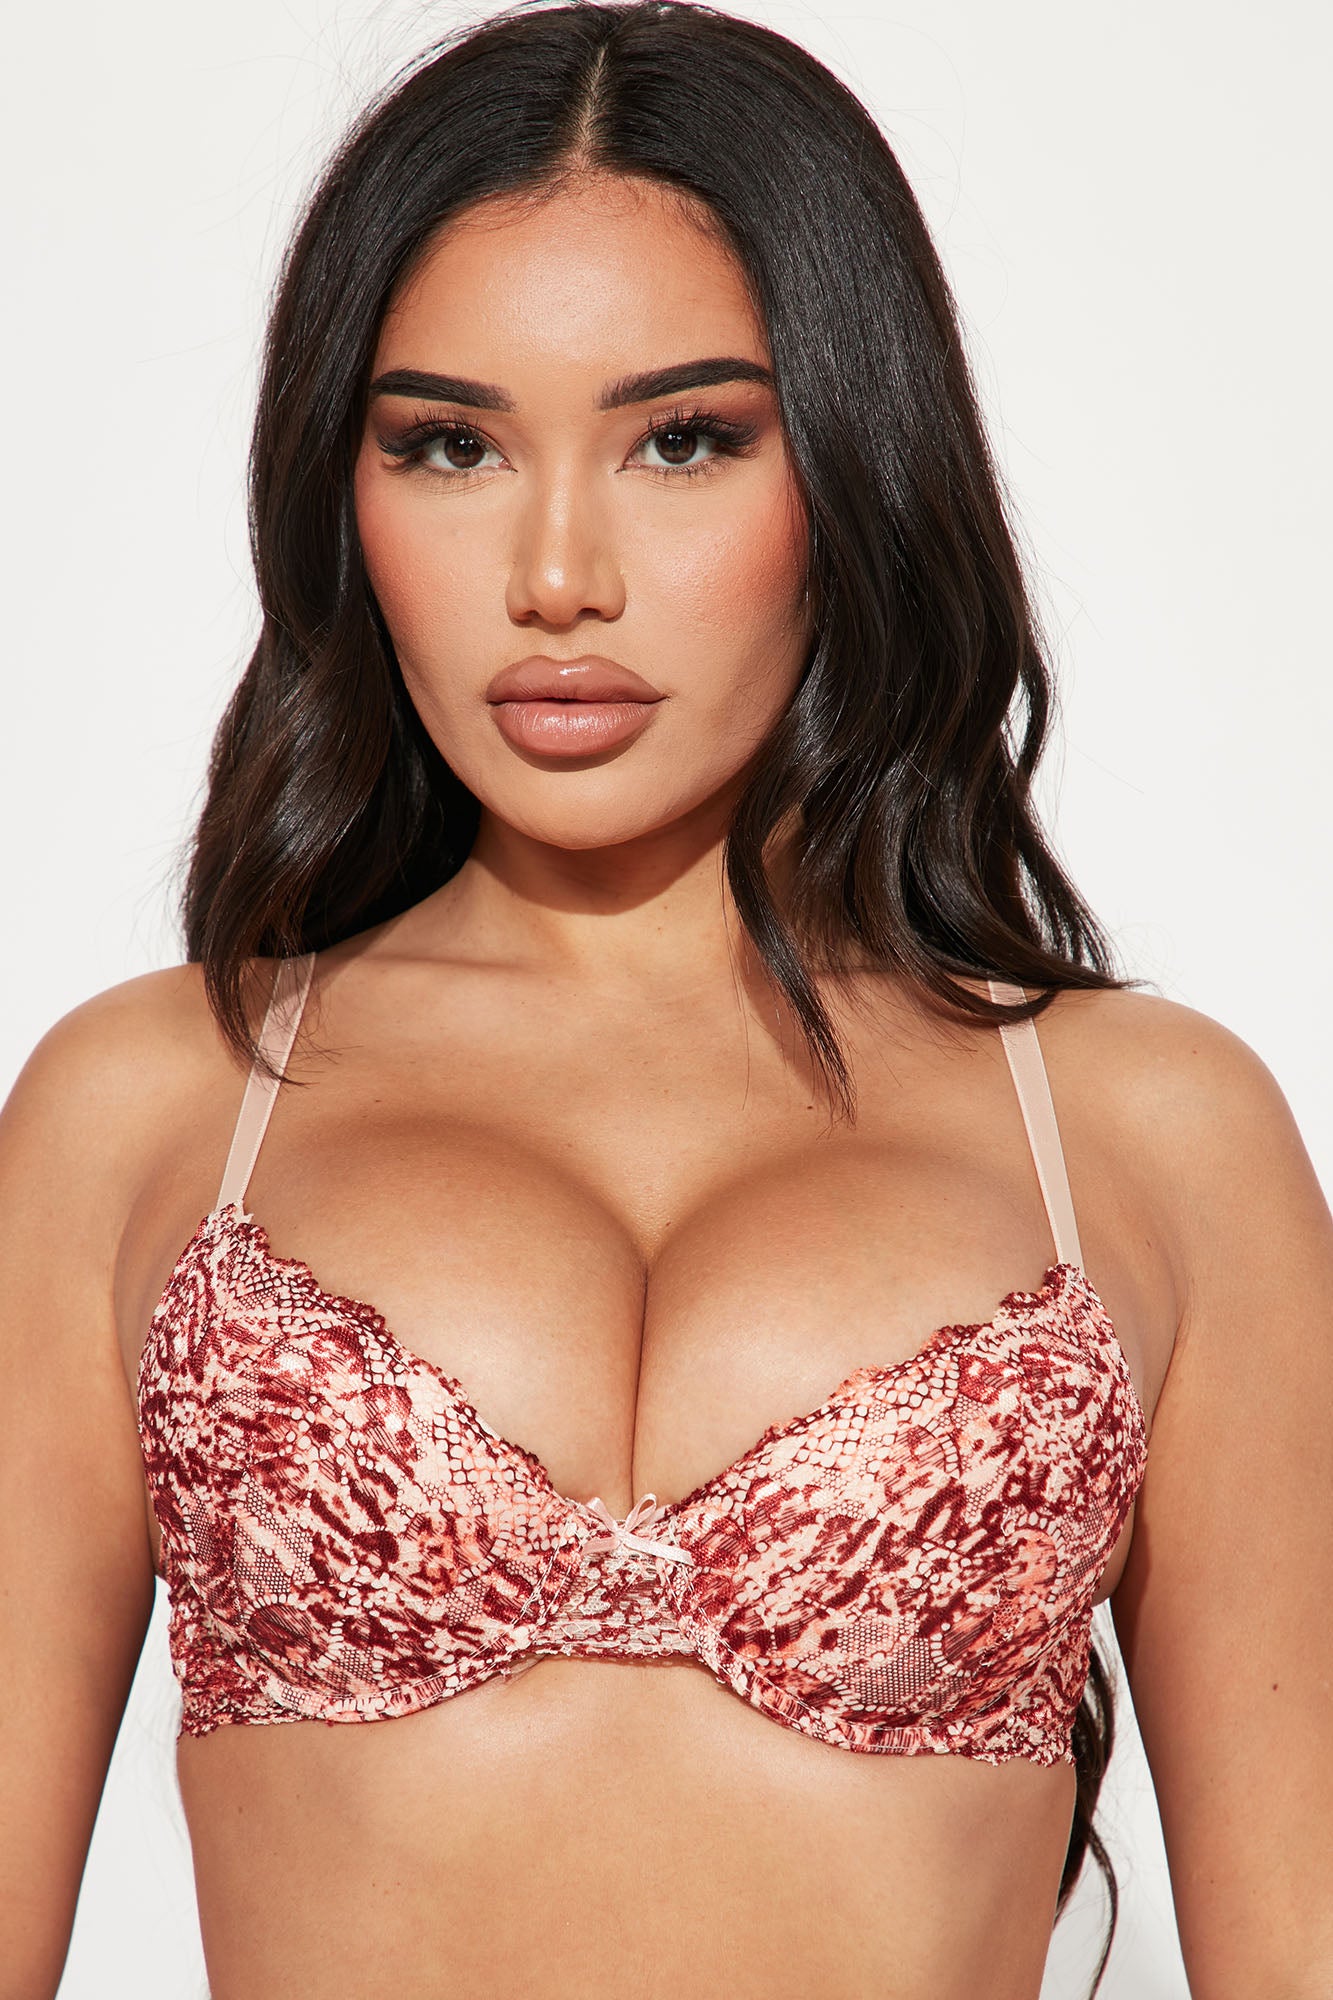 One For Each Lover 3 Pack Bras - Black/Brown